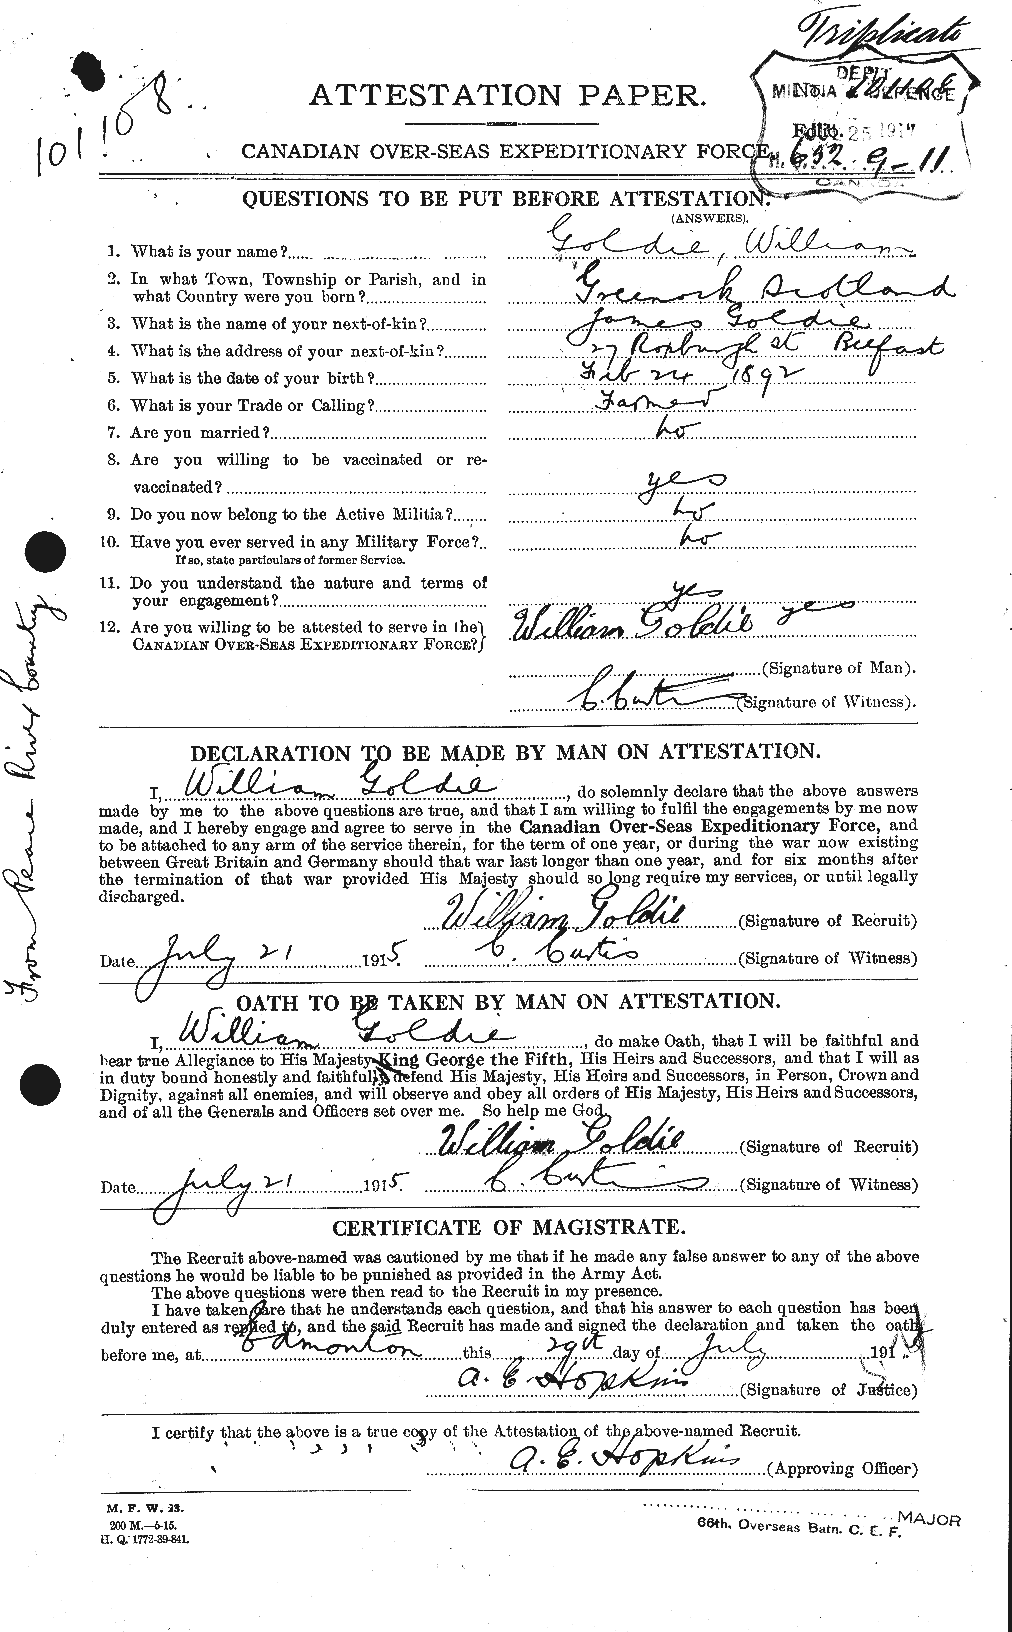 Personnel Records of the First World War - CEF 353952a